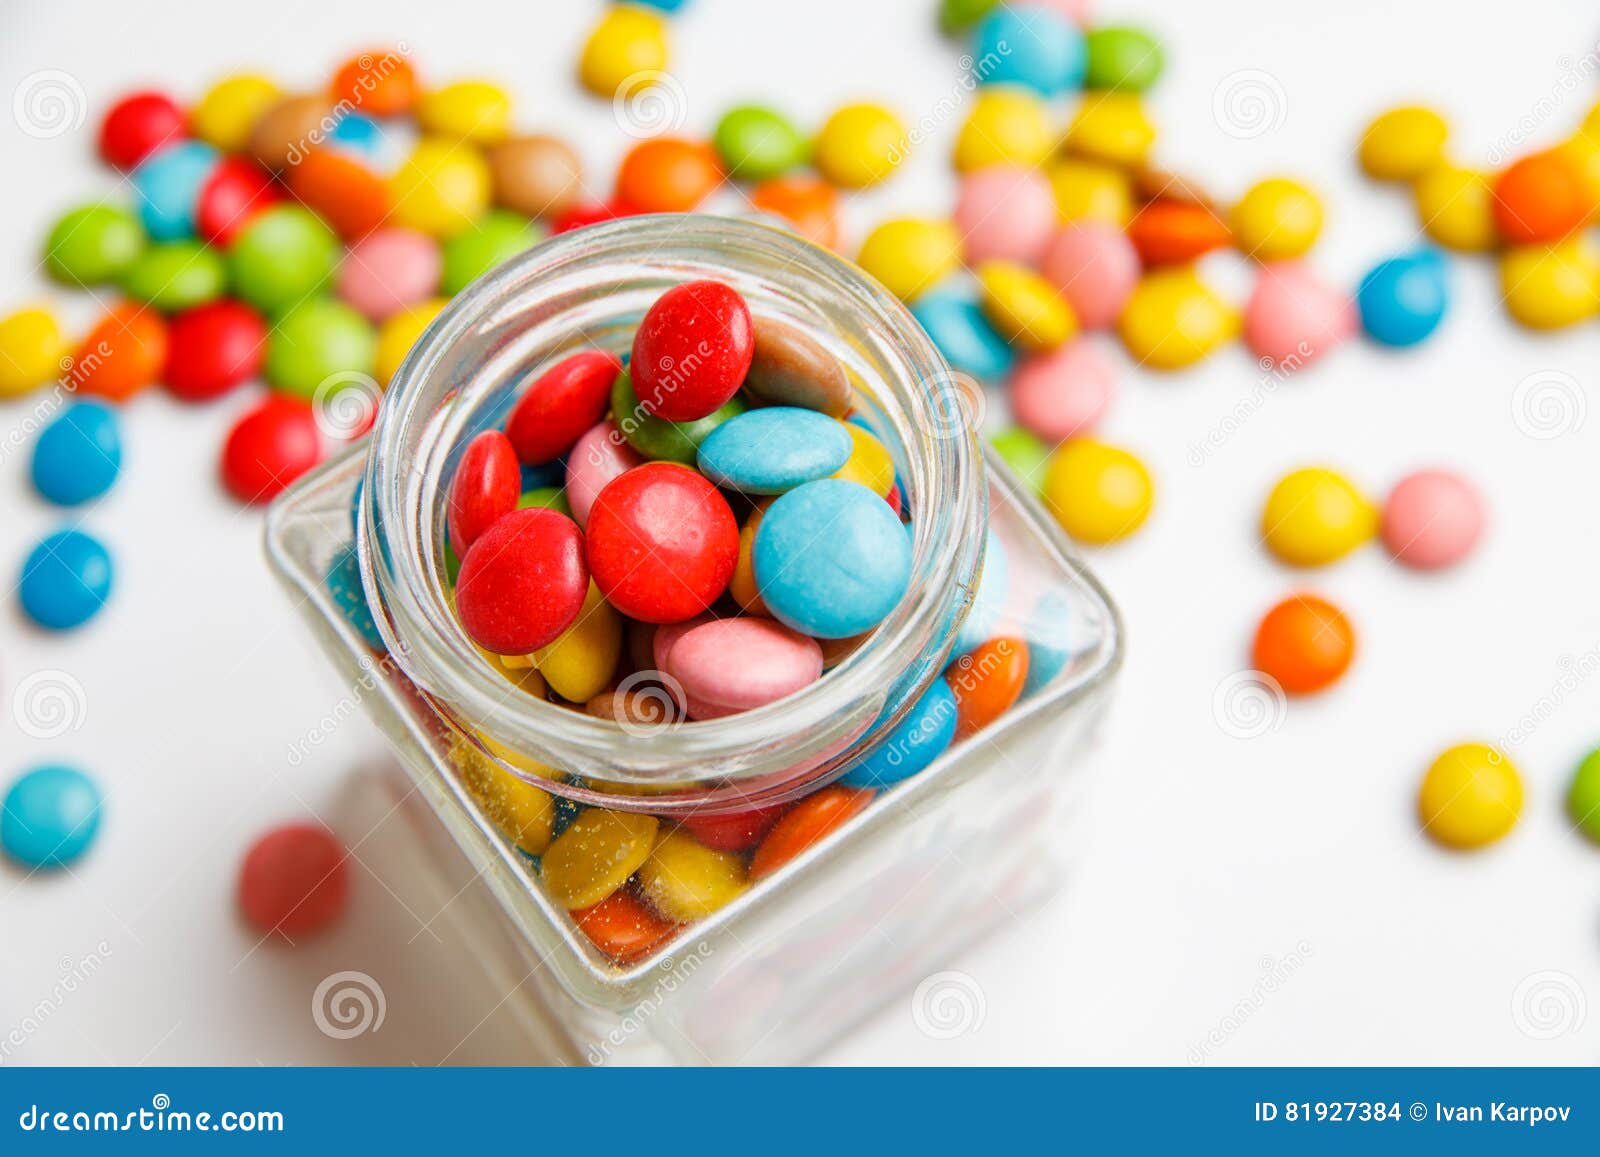 Jar Full of Colorful Candies and Scattered Sweets. View from Above ...